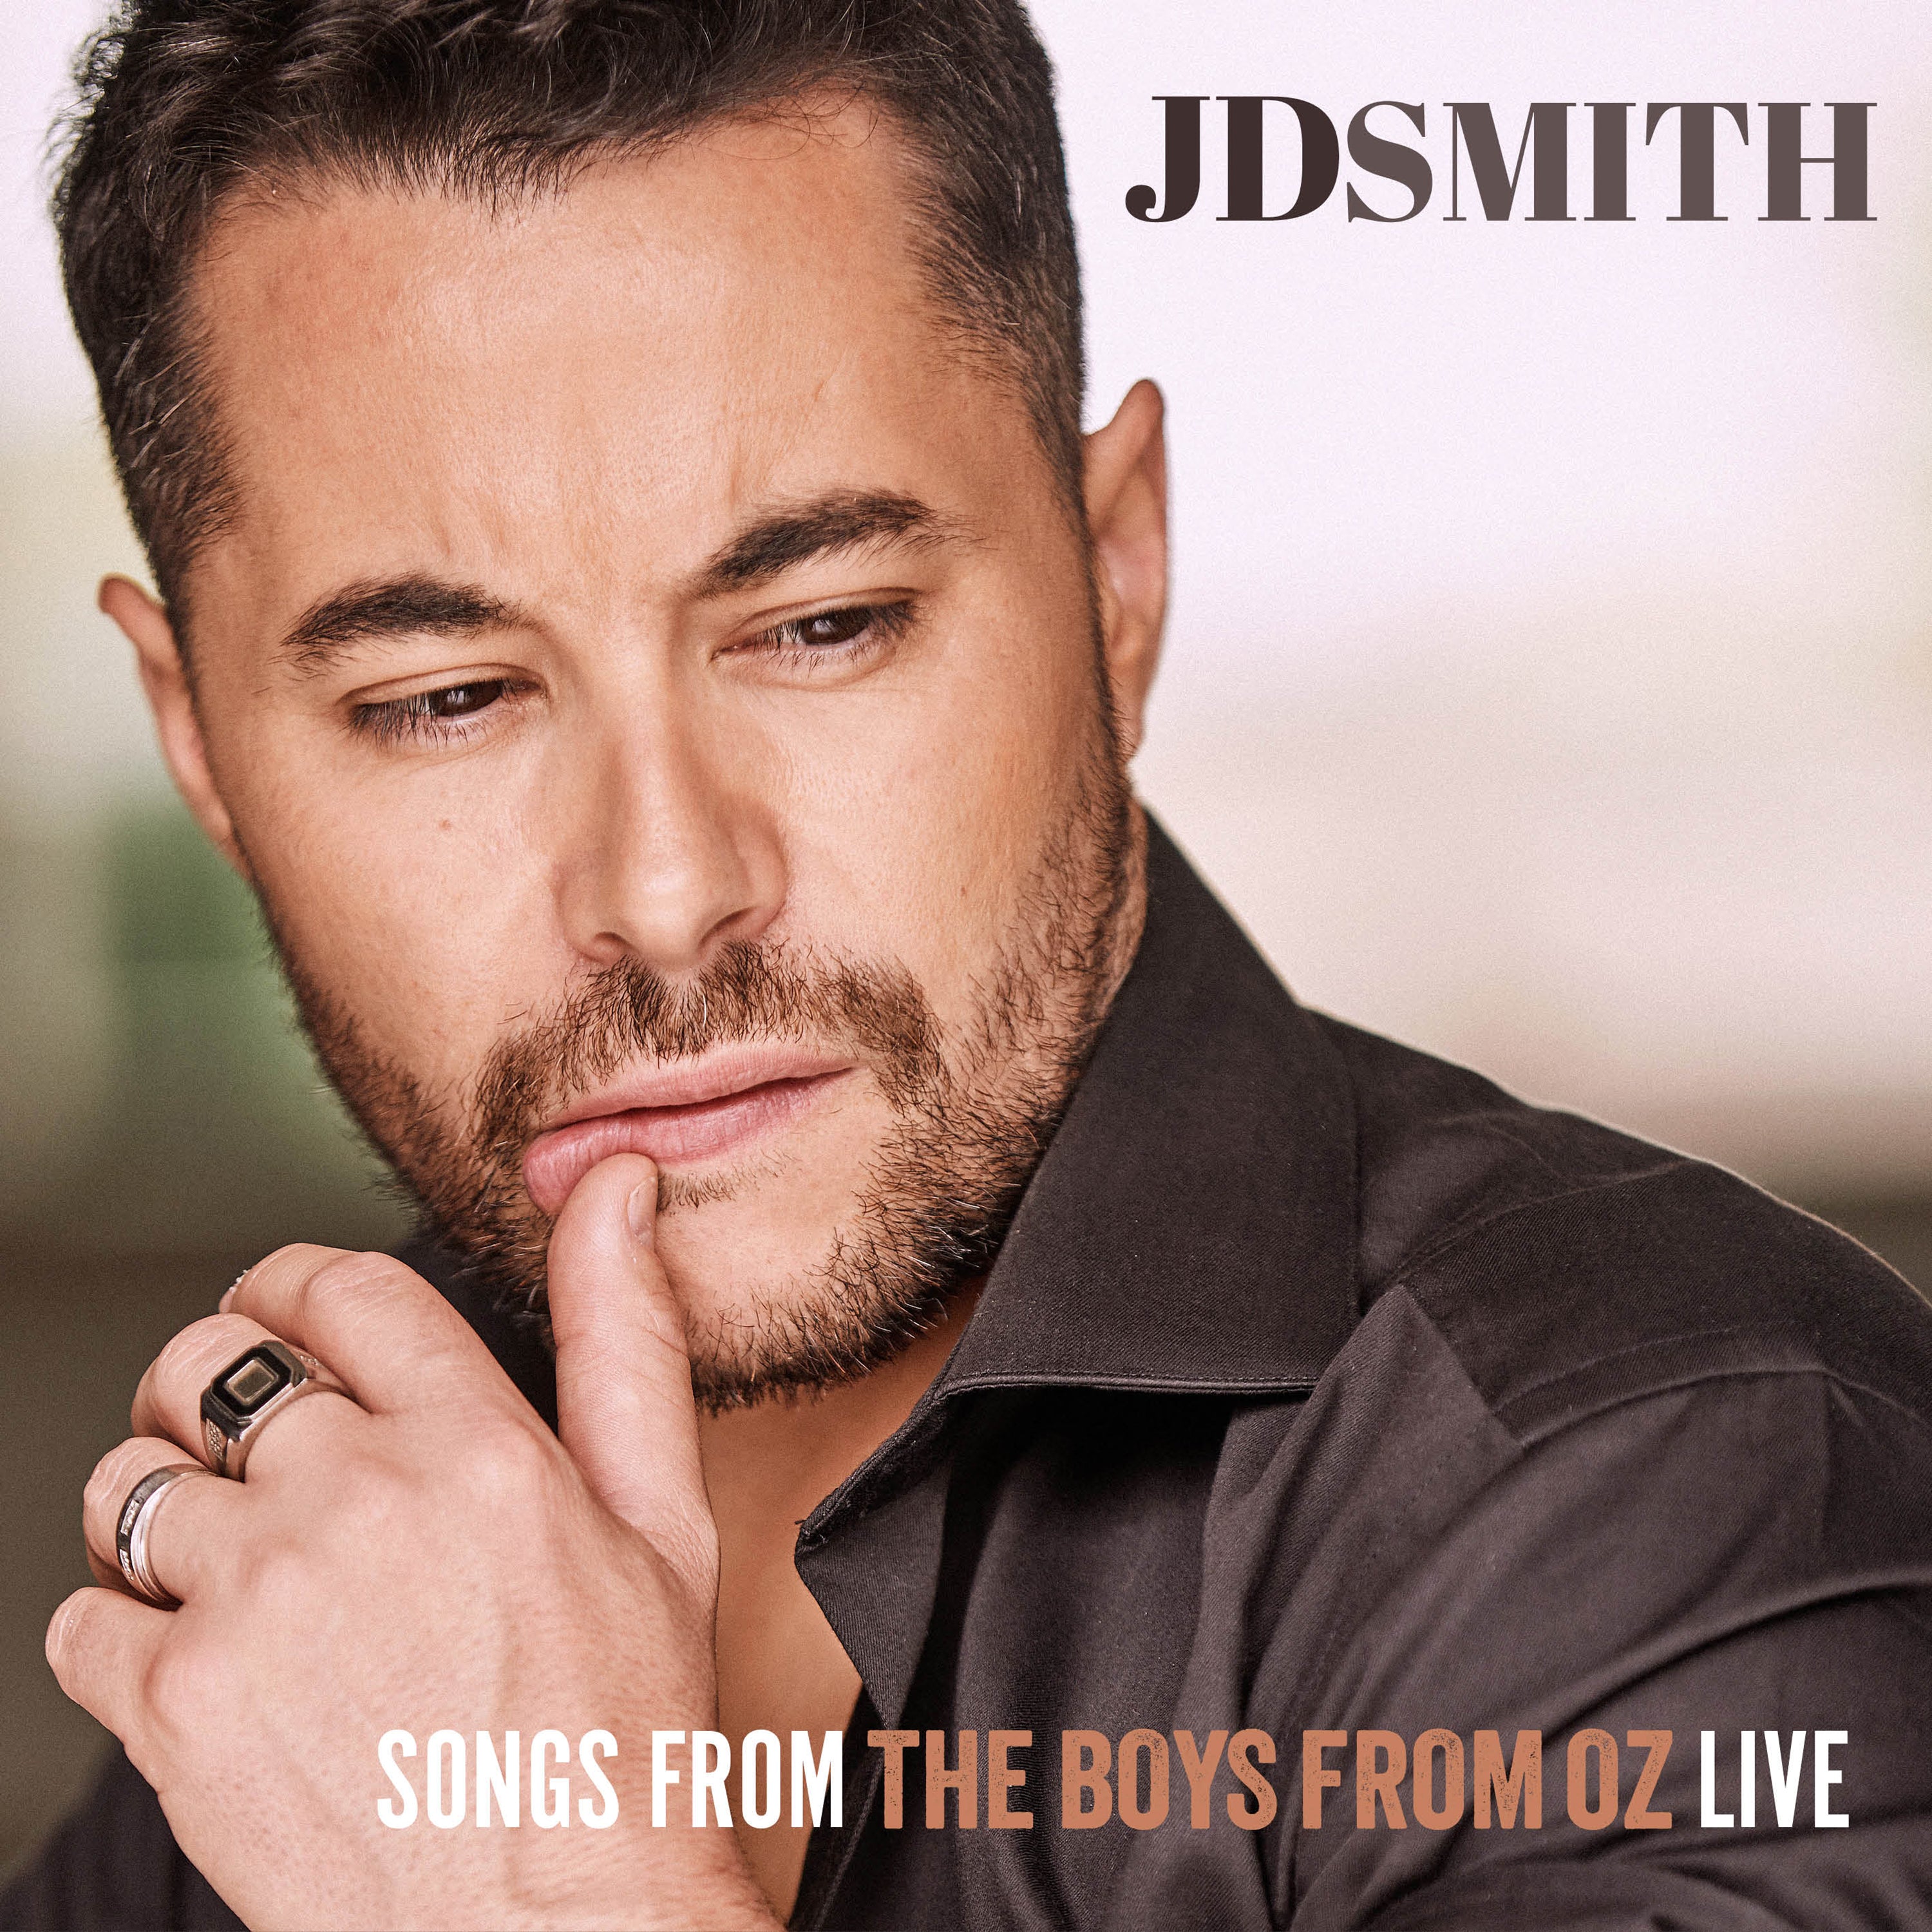 JD SMITH - THE SONGS FROM THE BOYS FROM OZ LIVE